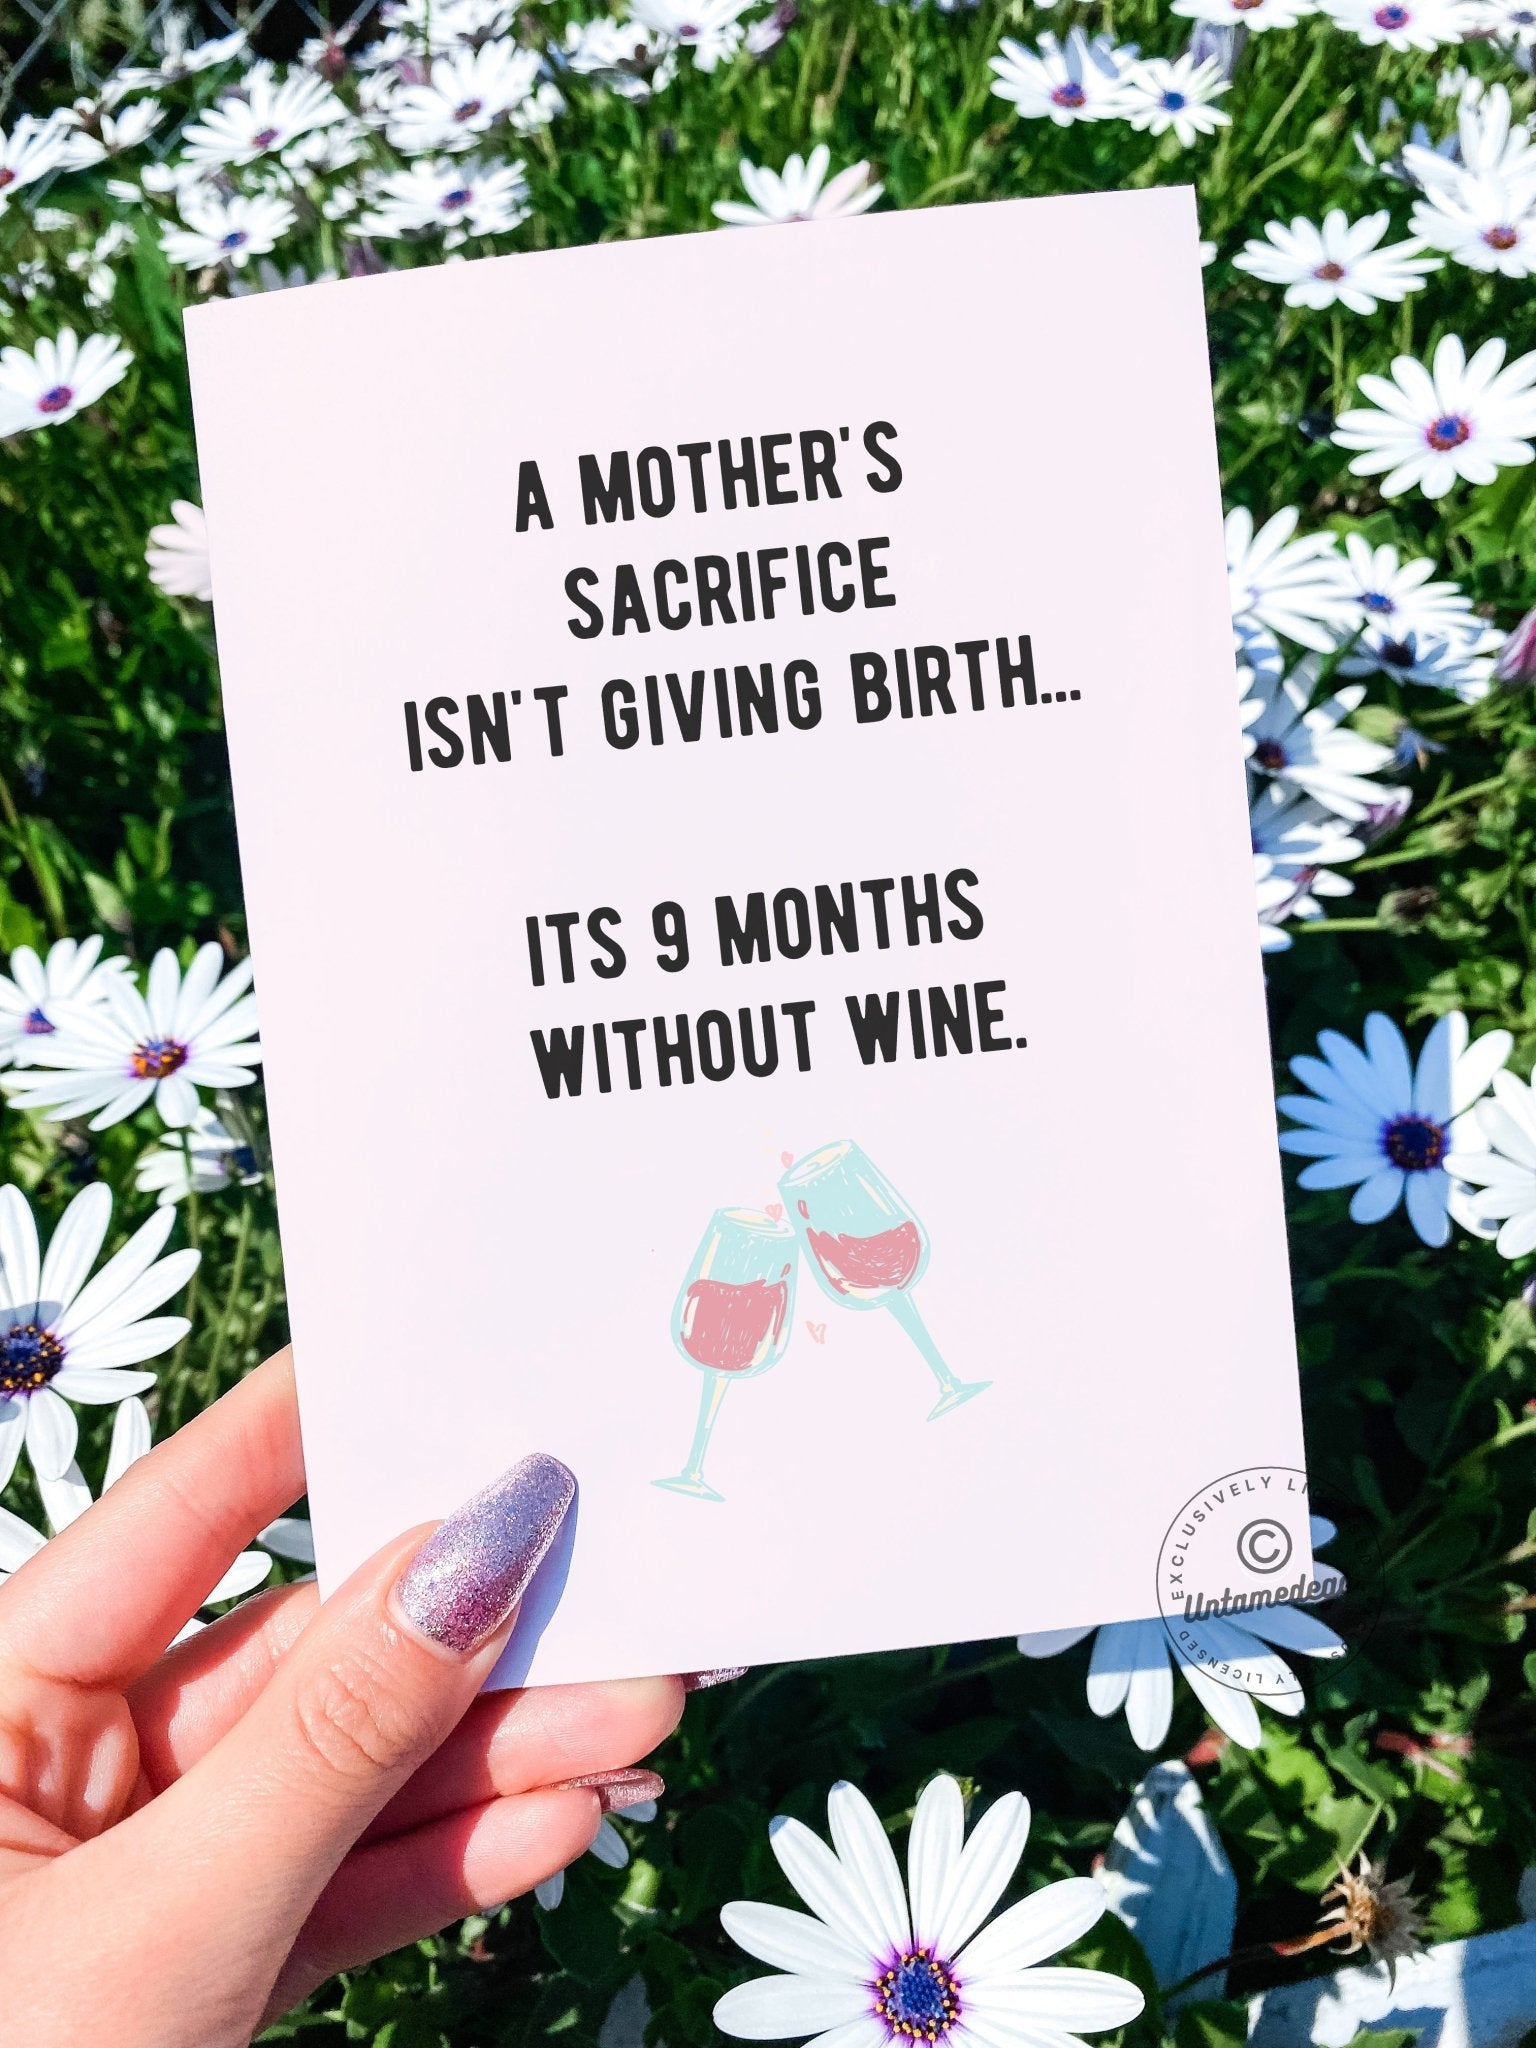 A Mother's Sacrifice Isn't Giving Birth It's 9 Months Without Wine Greeting Card - UntamedEgo LLC.